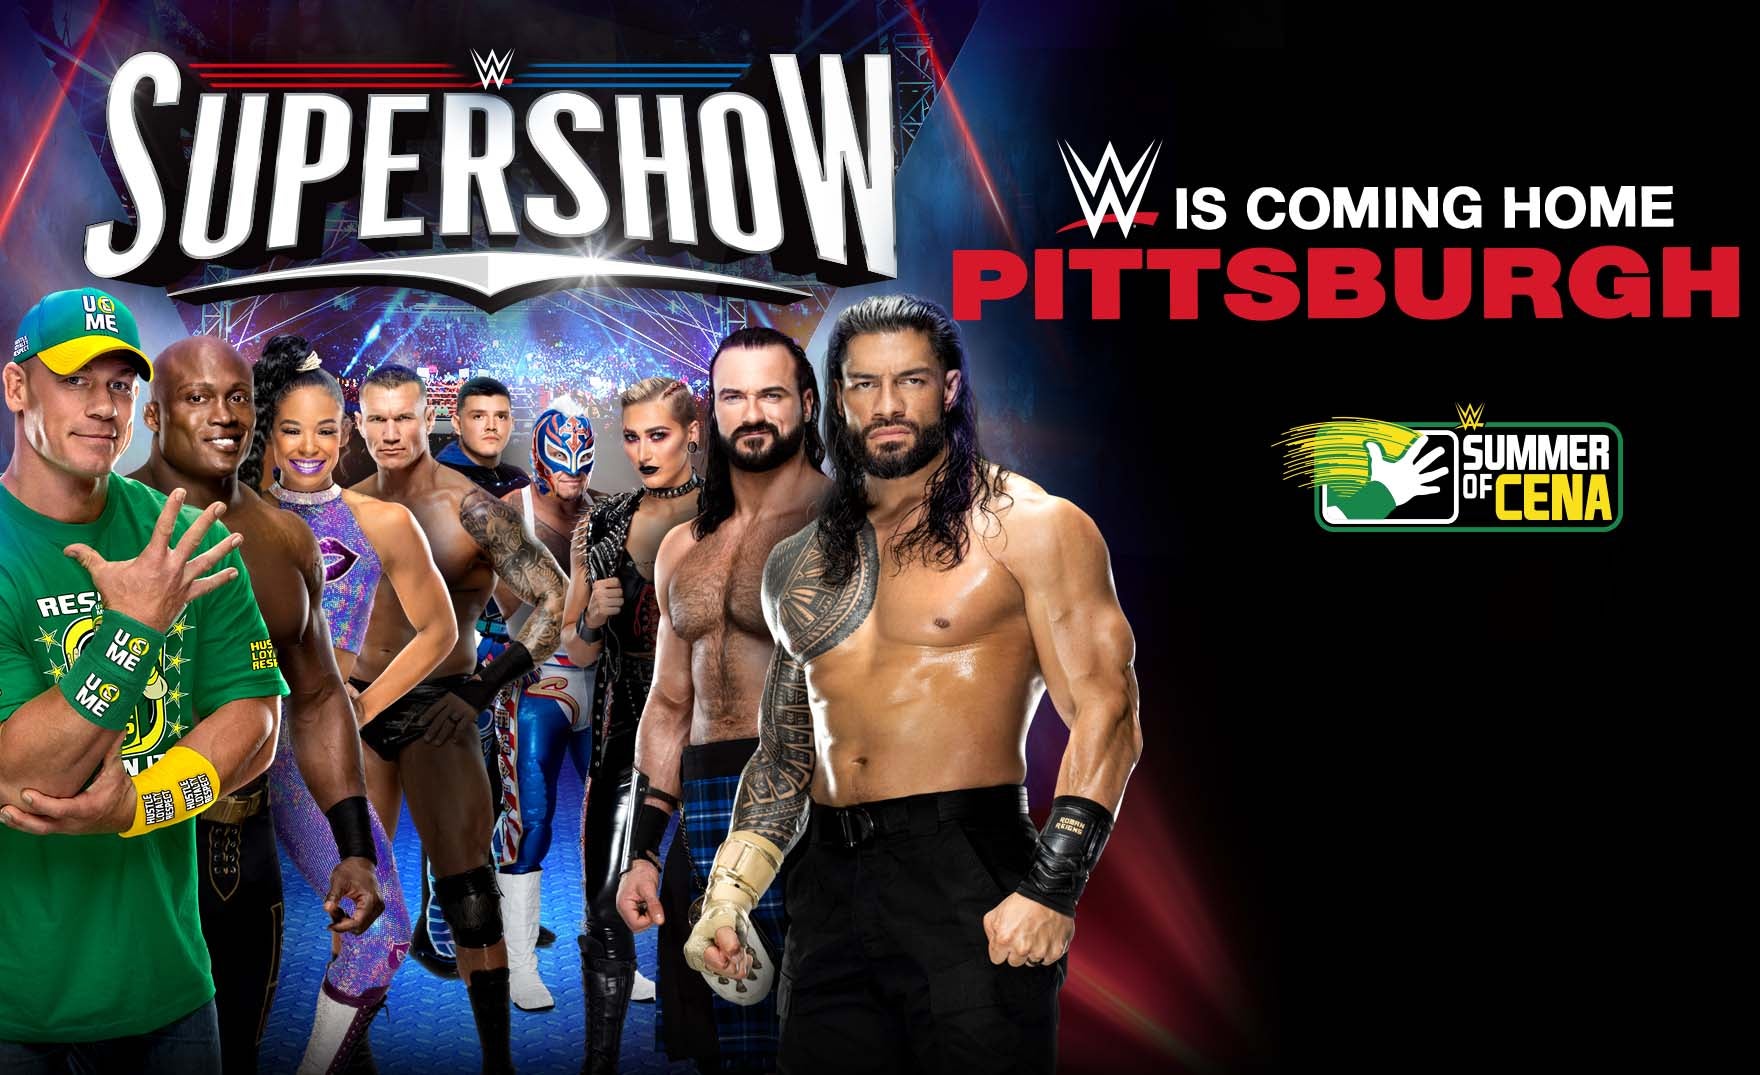 WWE Supershow PPG Paints Arena